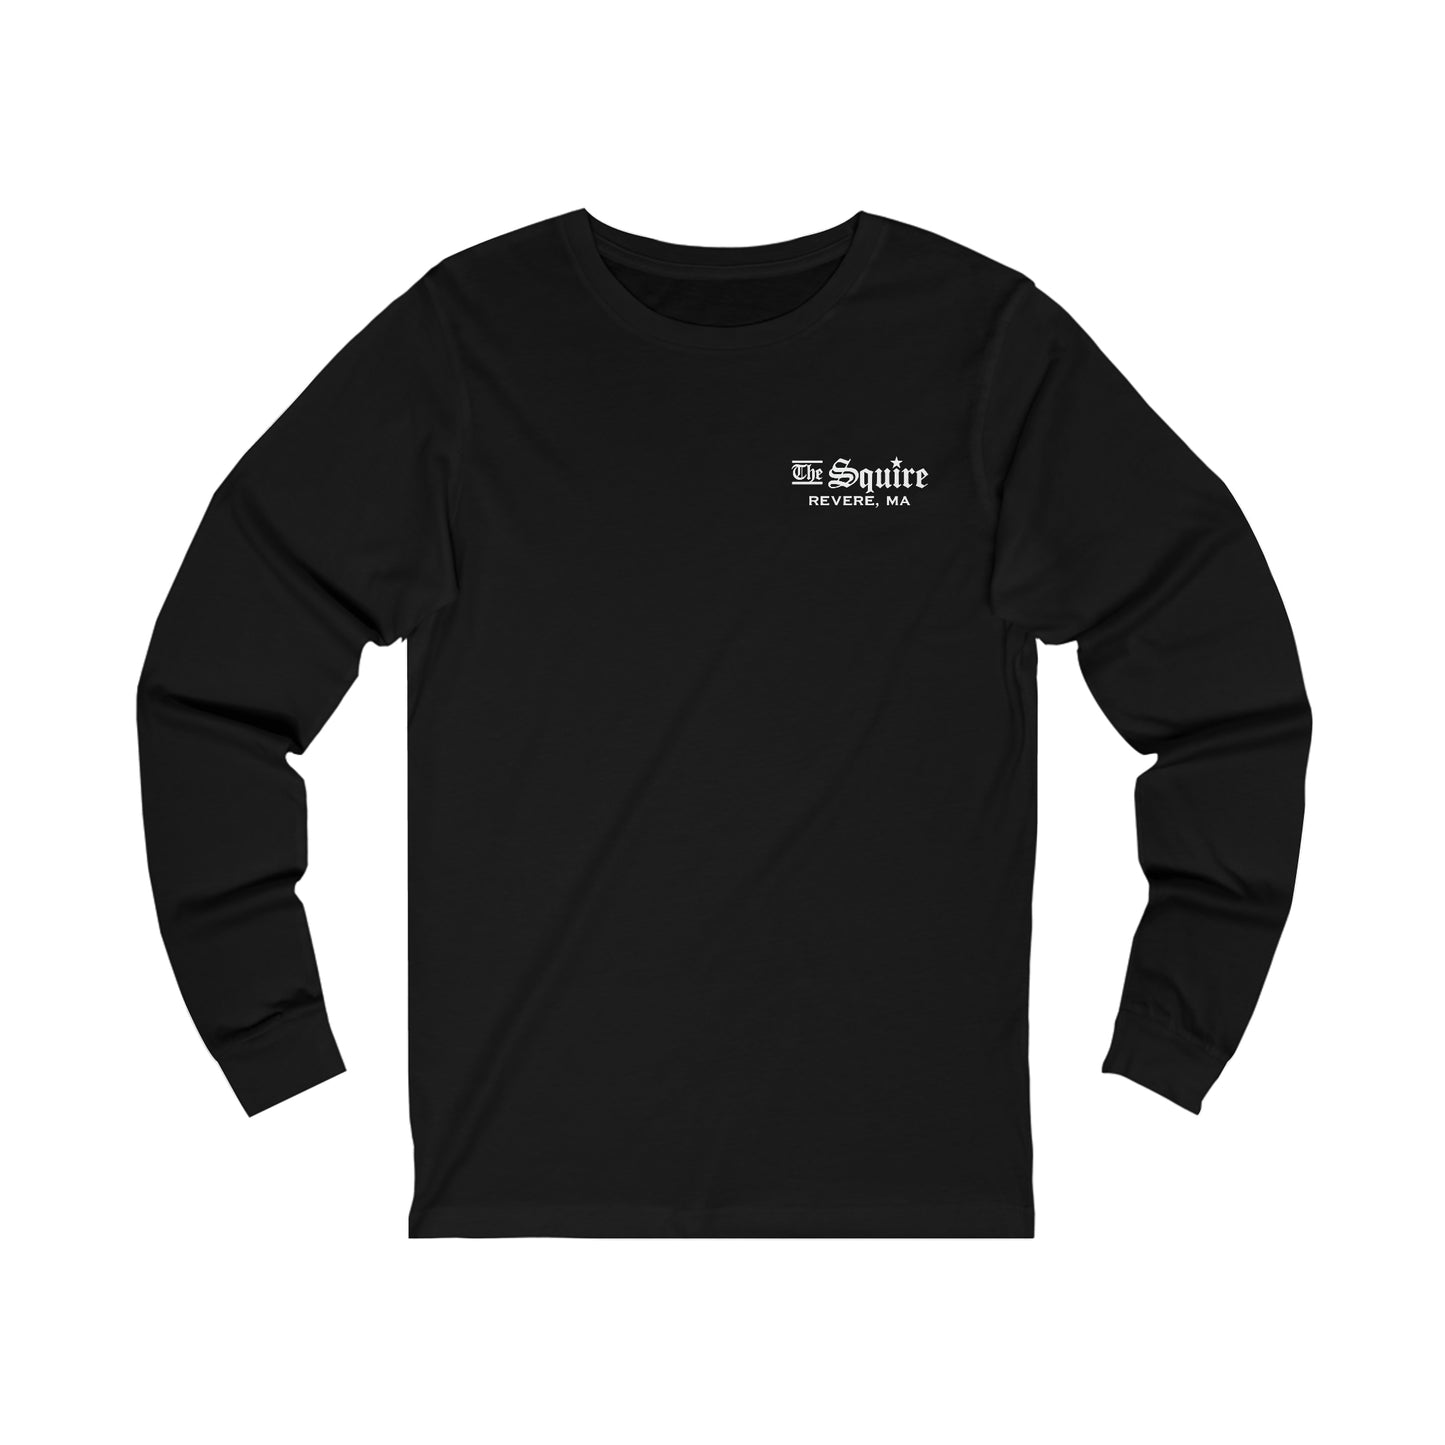 Squire Unisex Jersey Long Sleeve Tee